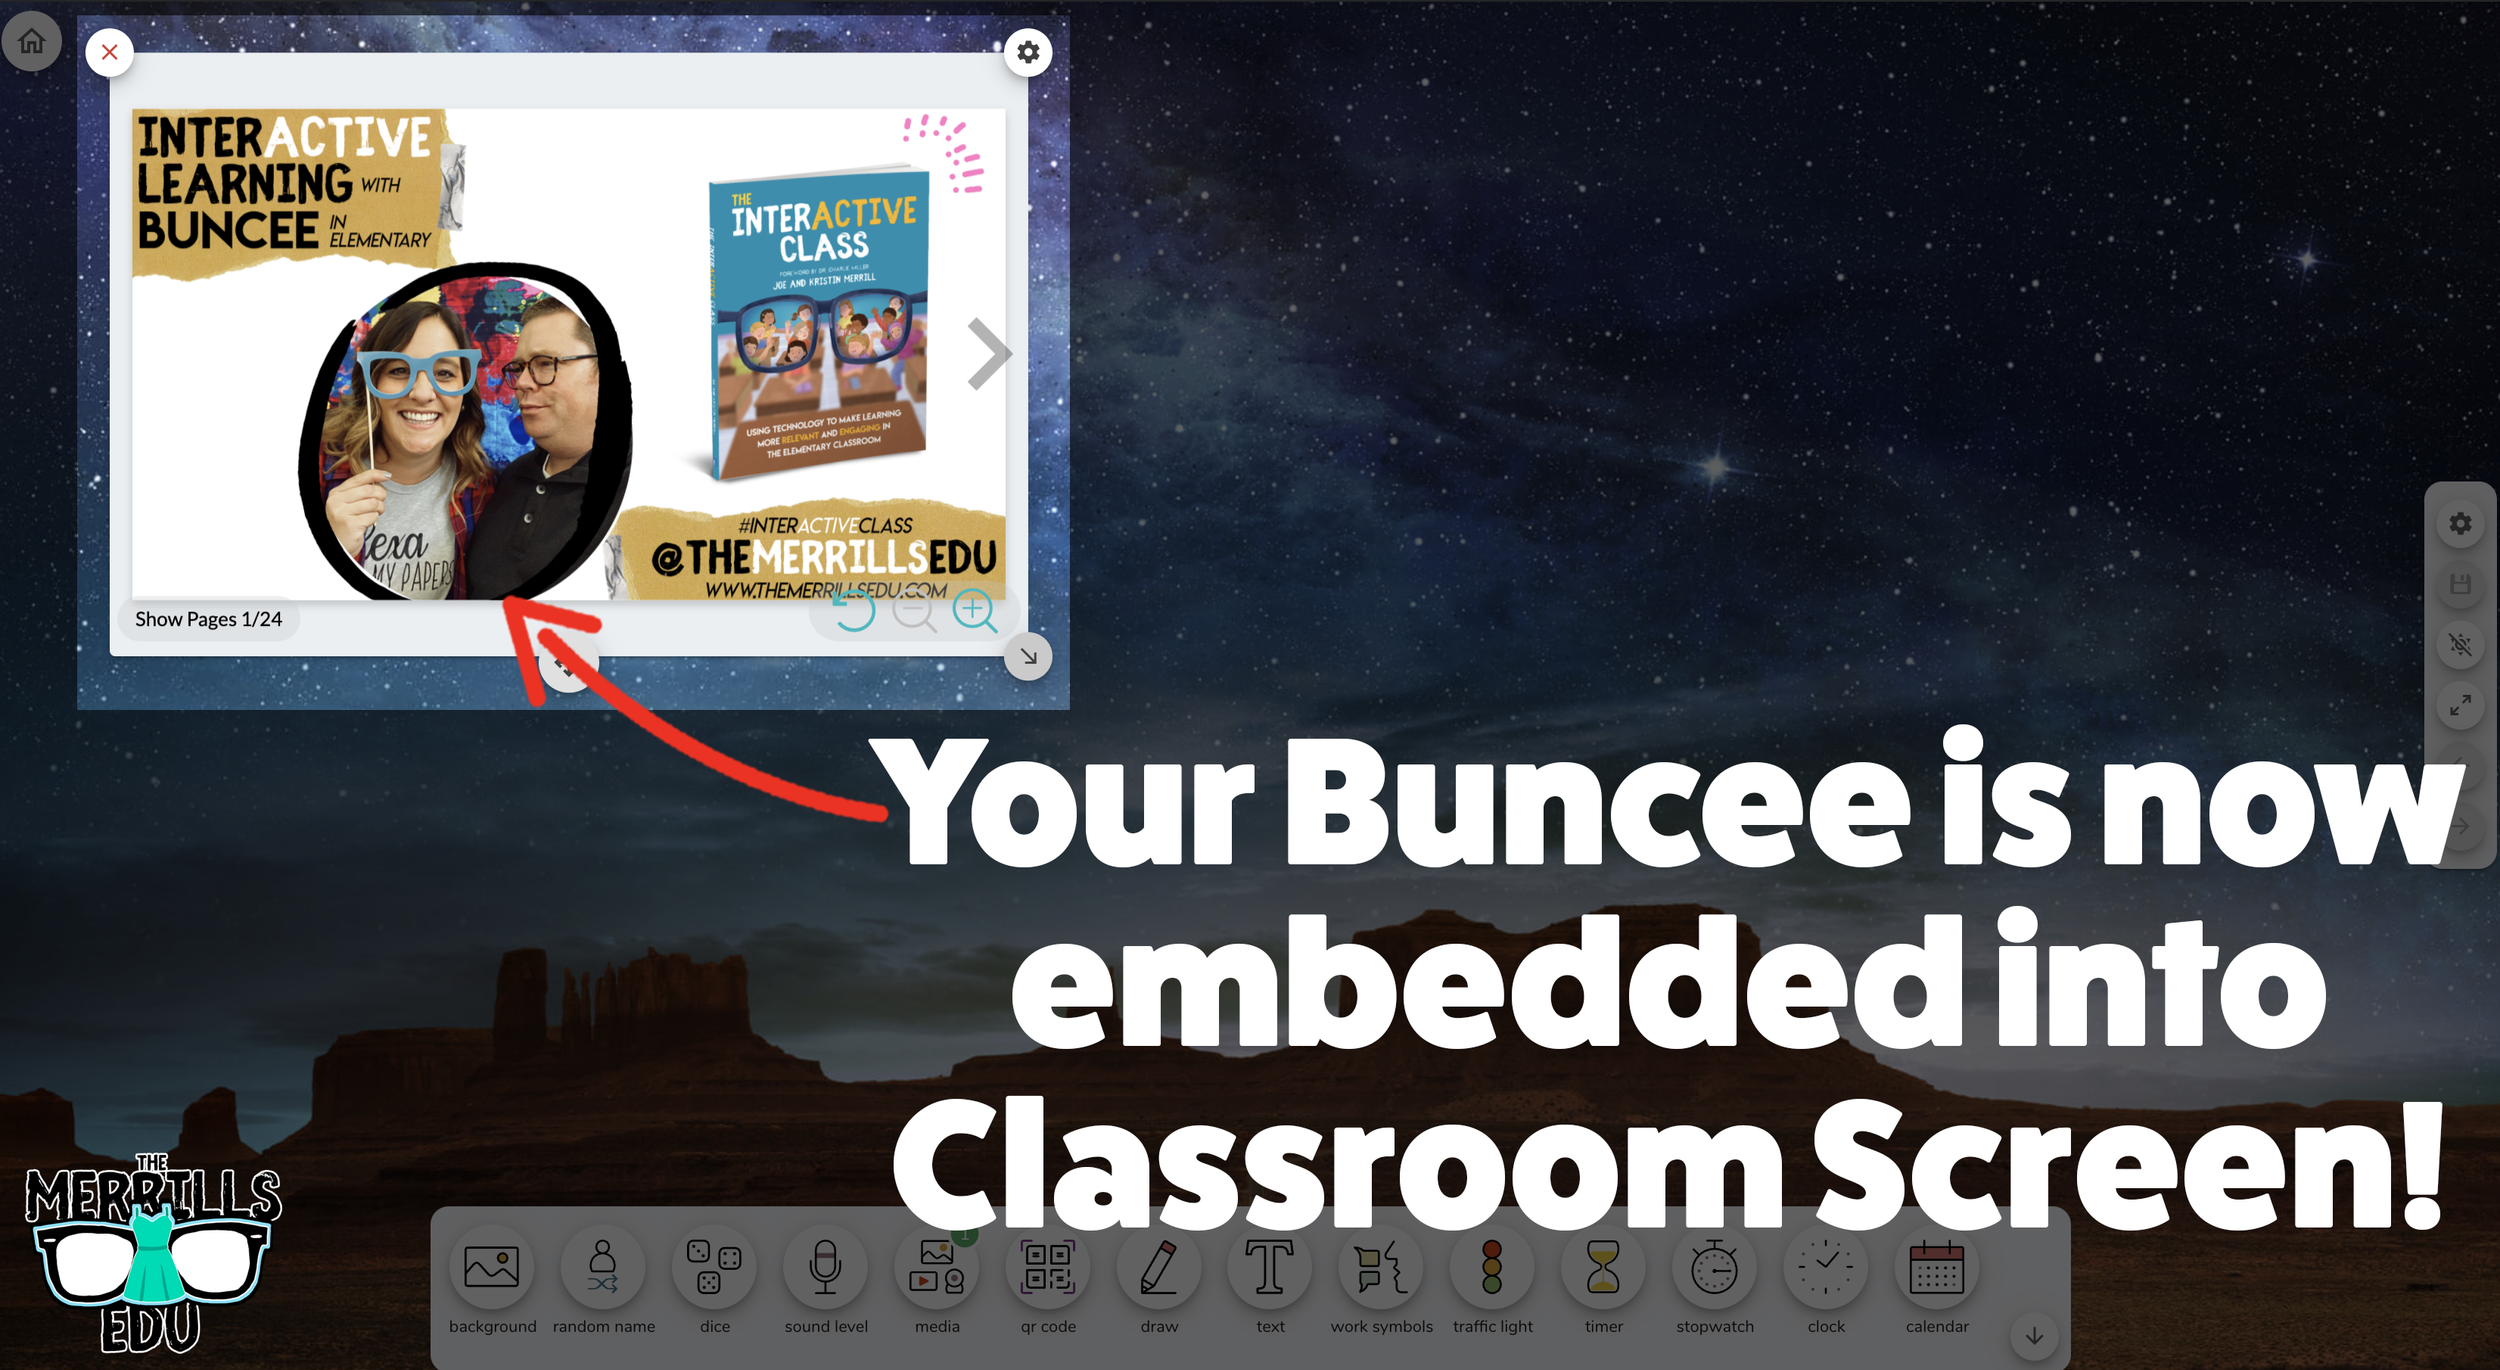 Buncee_Embedded_into_Classroom_Screen_8.png